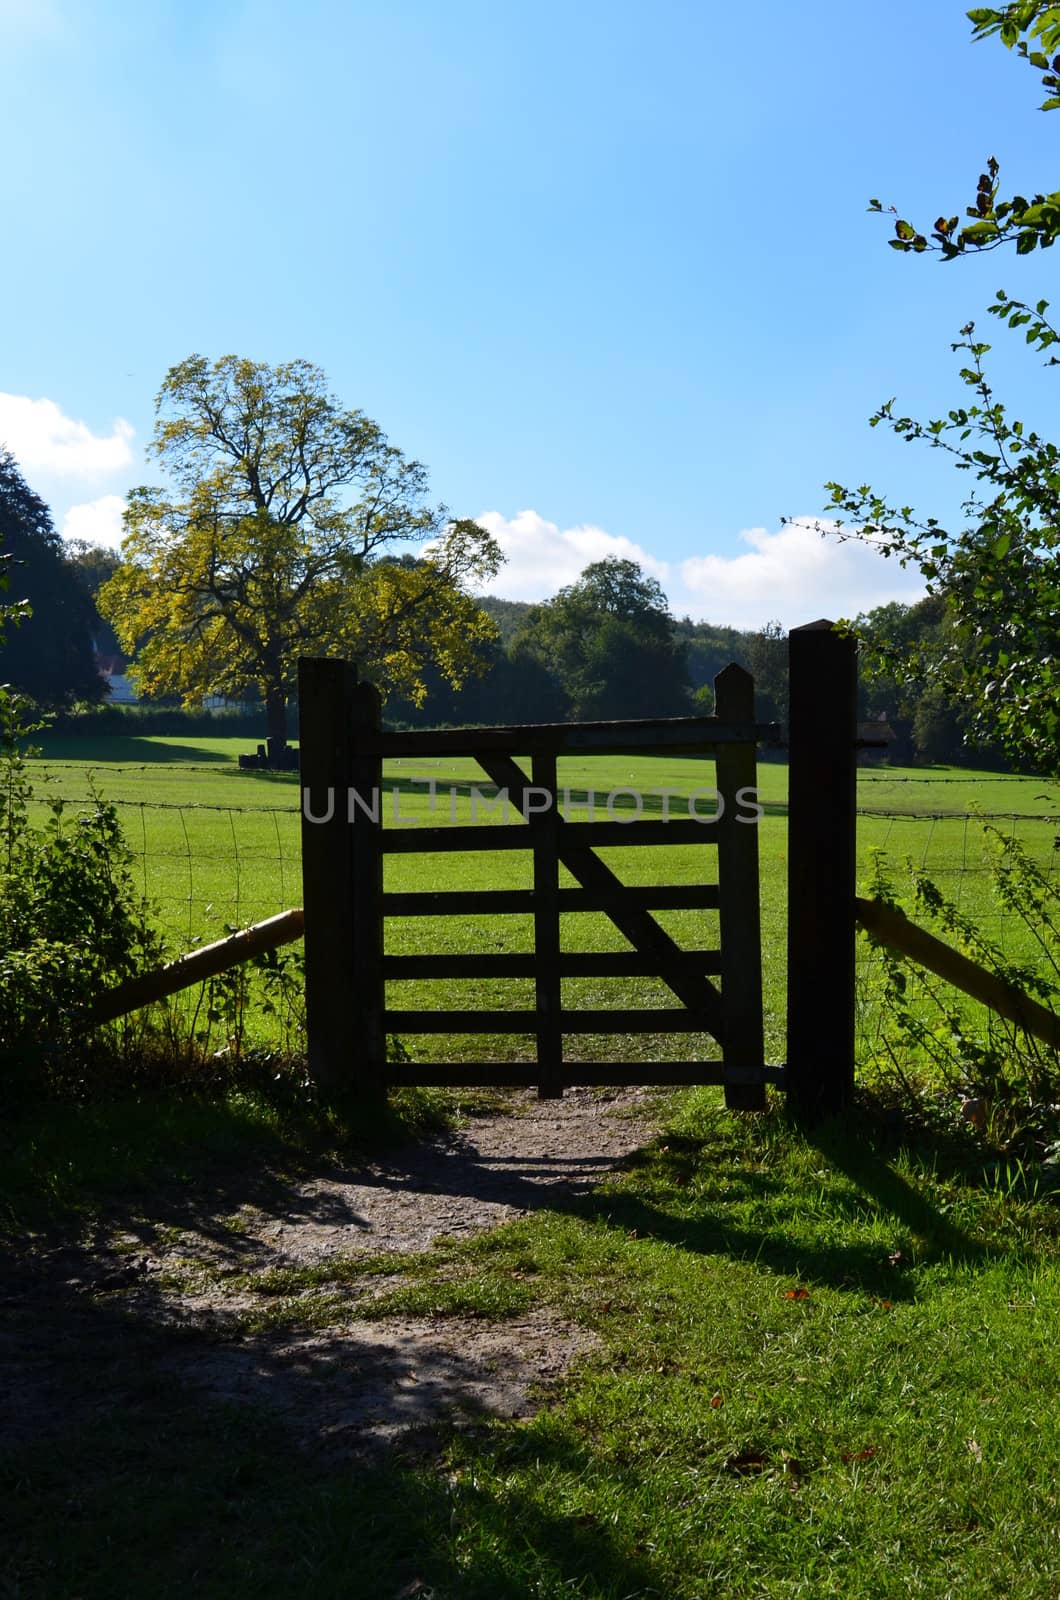 Rustic countryside wooden gate with a pasture field in the distance.